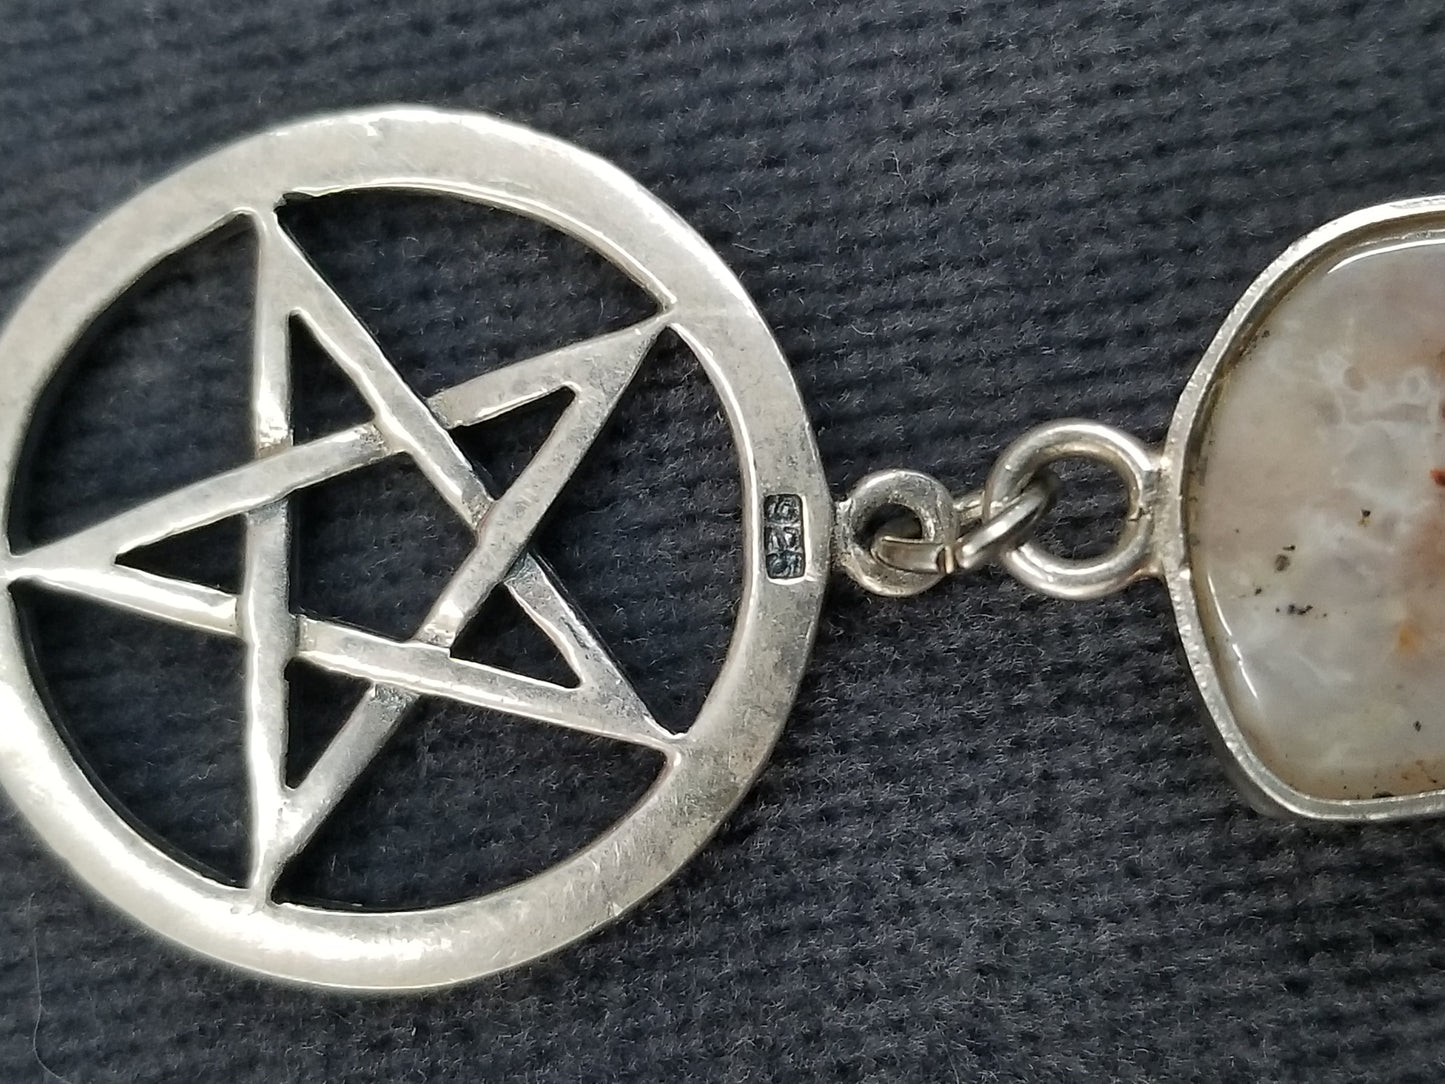 Pentacle and Jasper sterling silver Pagan pendant